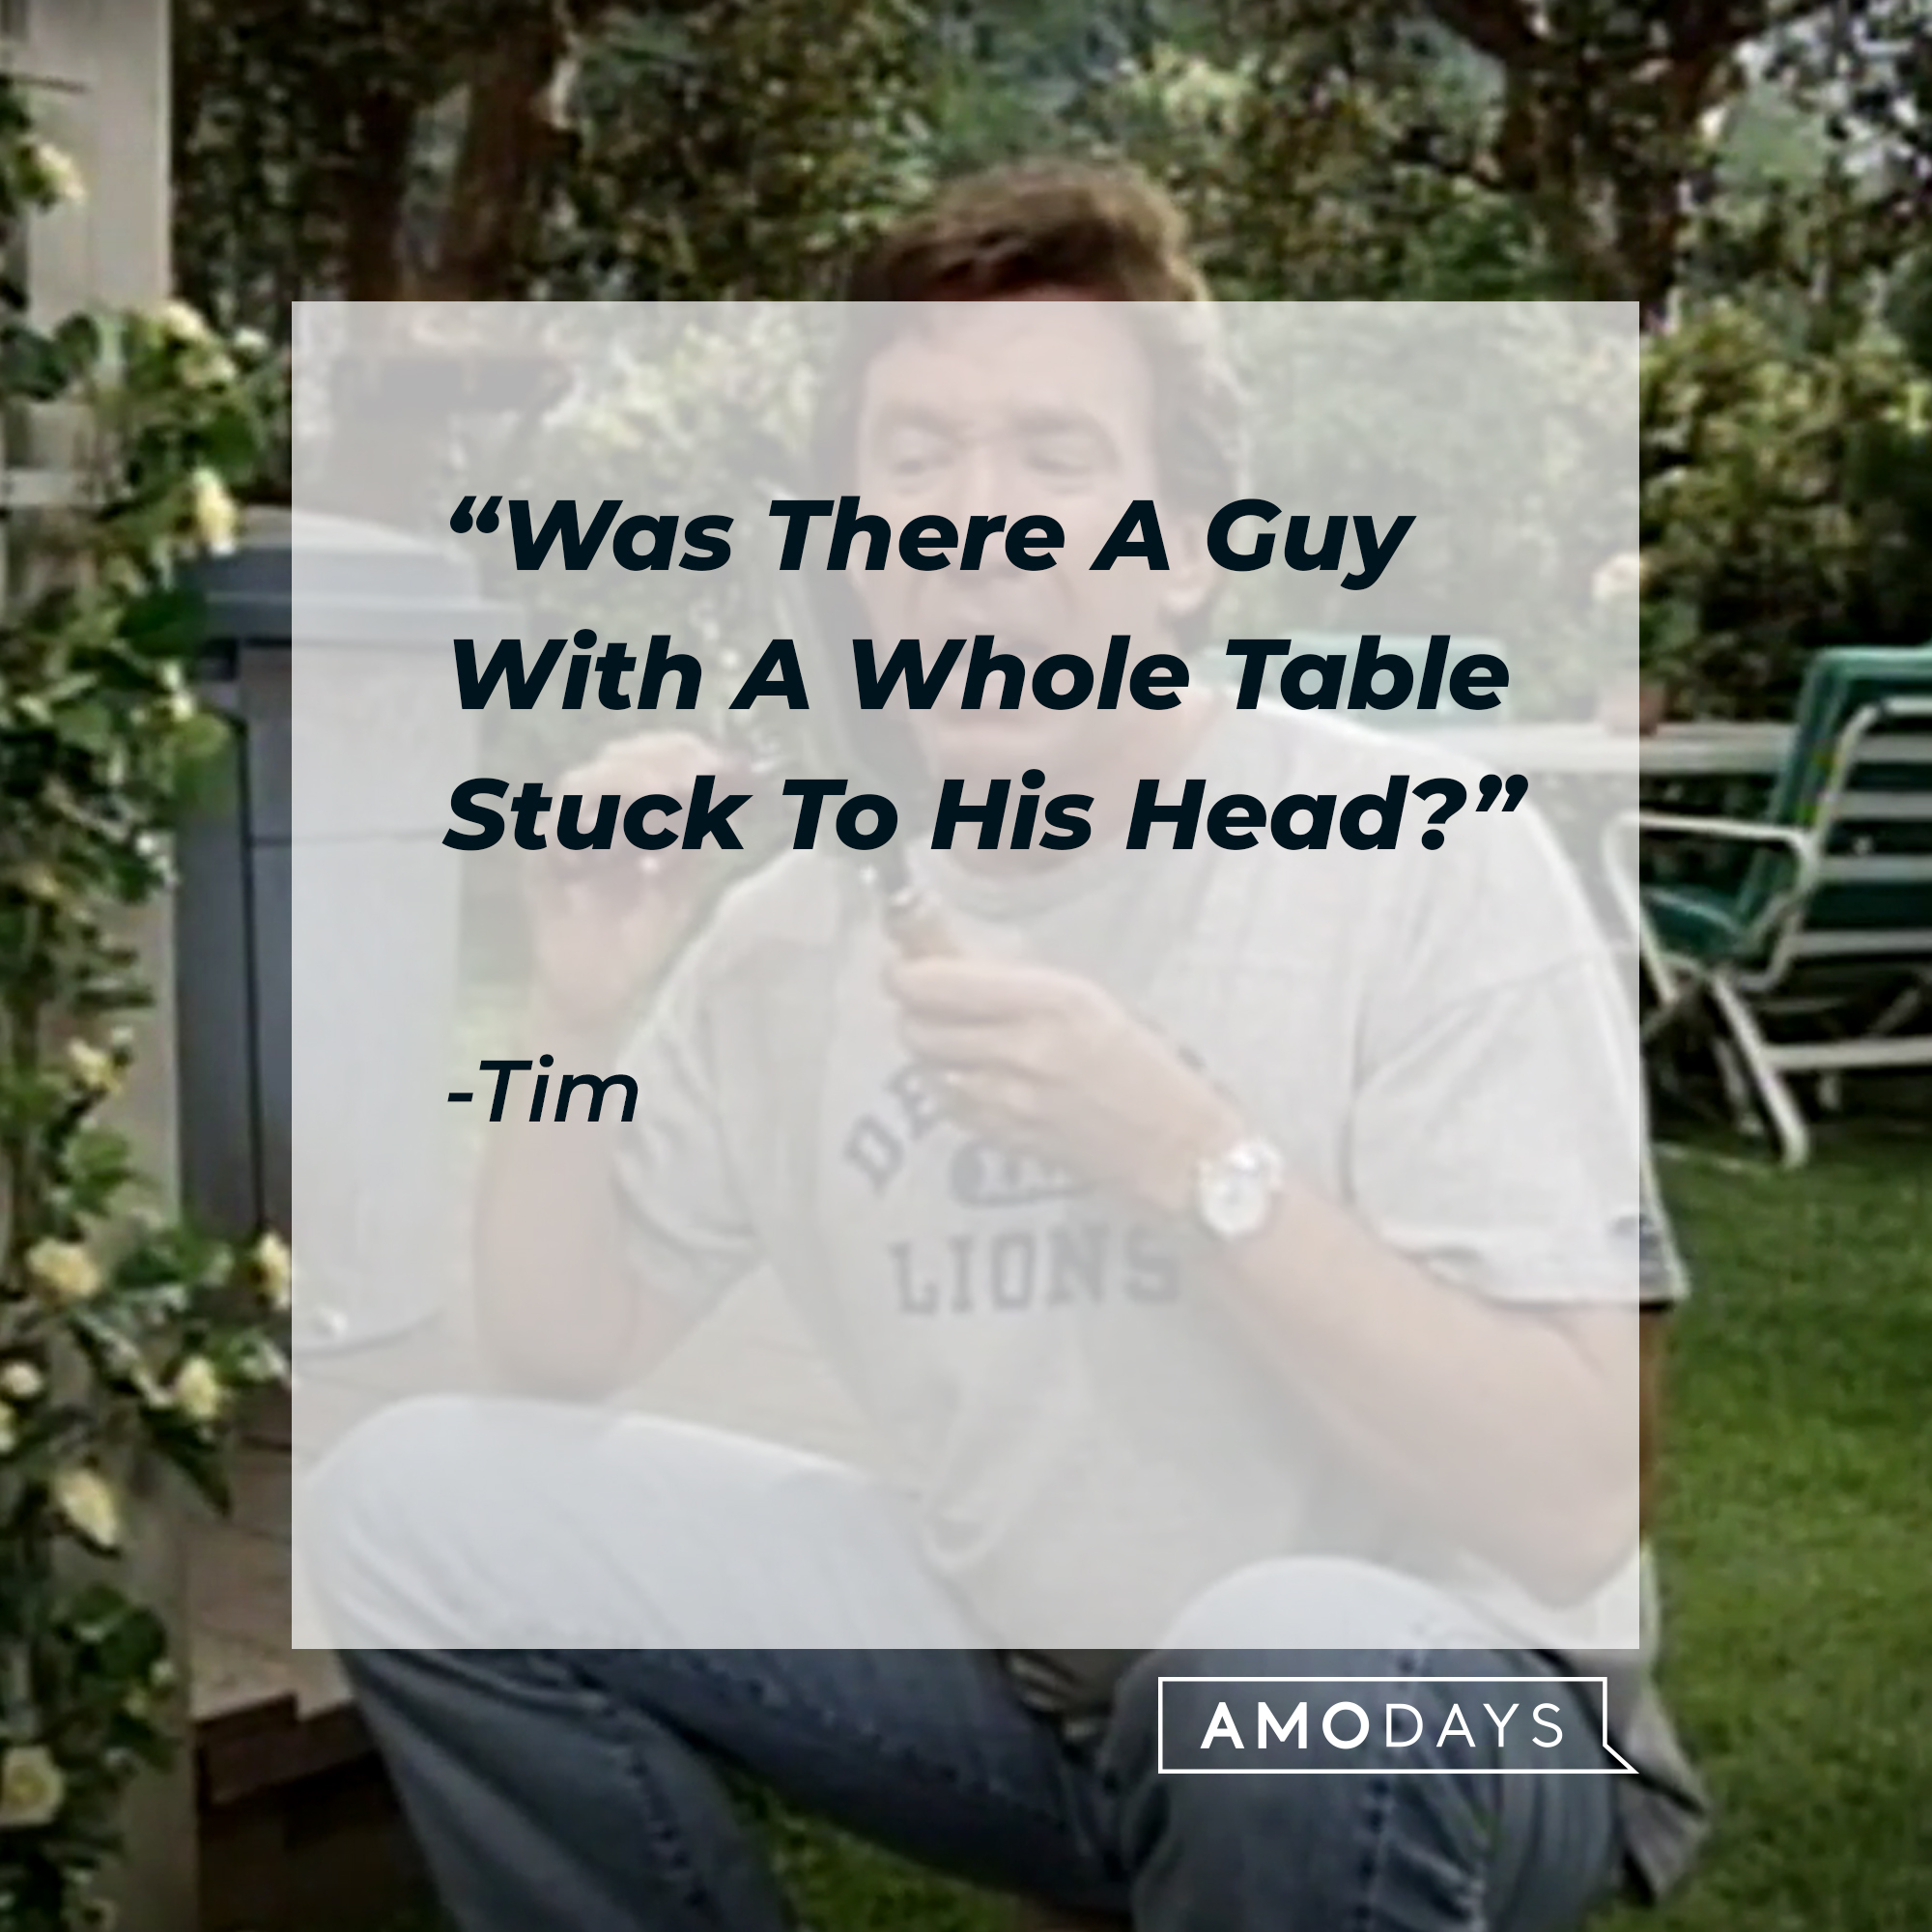 Brad's quote: “Was There A Guy With A Whole Table Stuck To His Head?” | Source: youtube.com/ABCNetwork